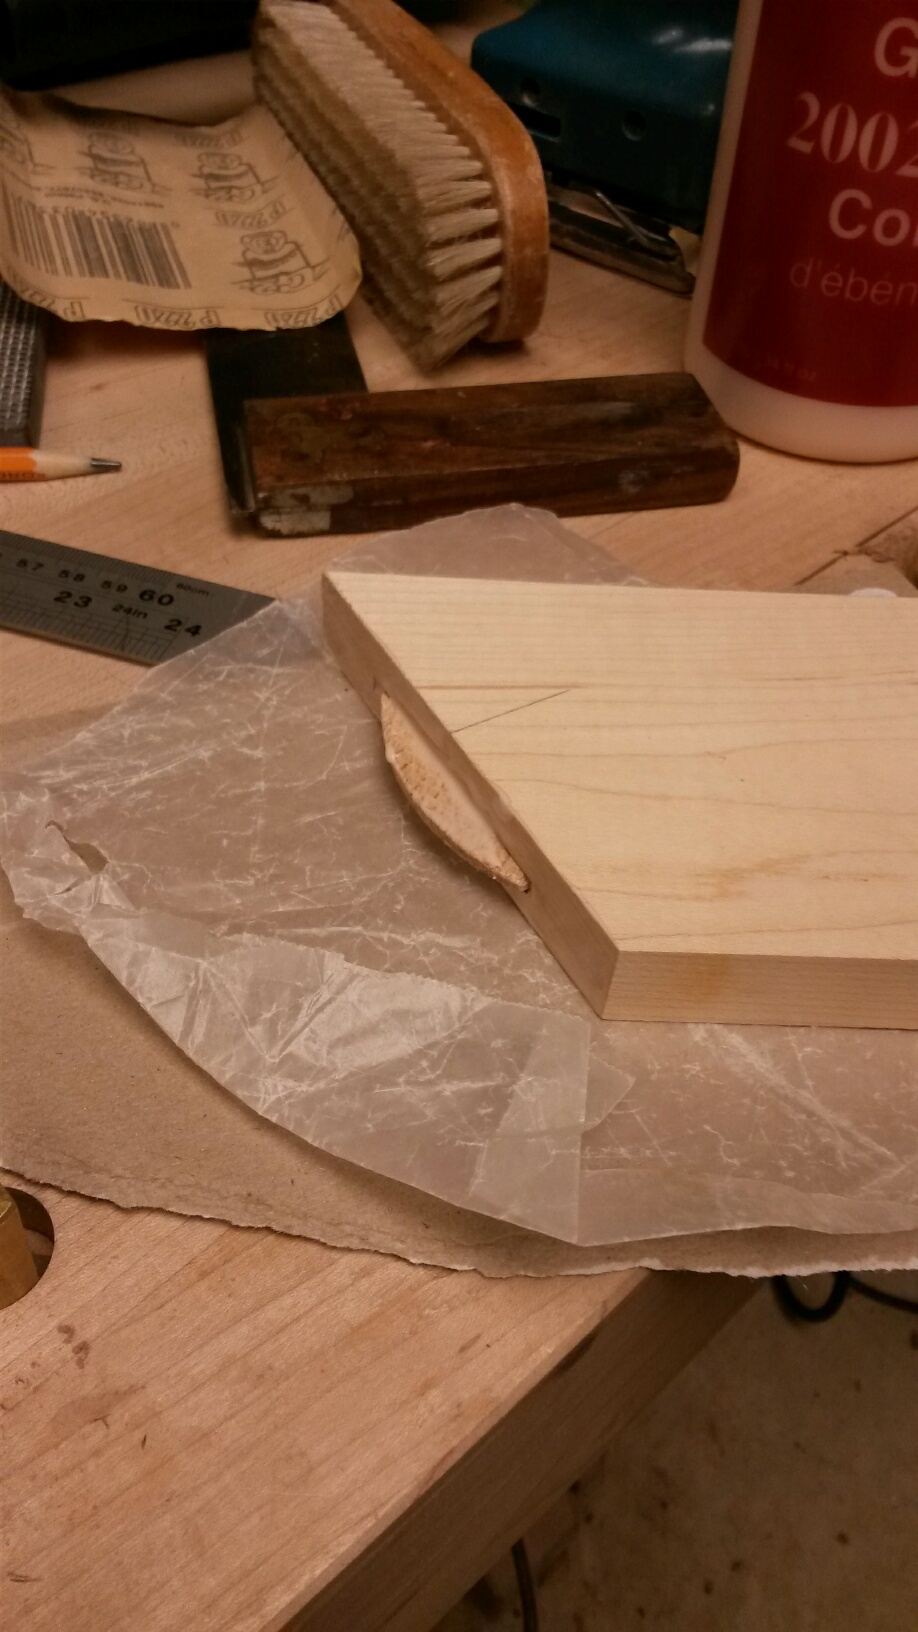 Gluing up the base